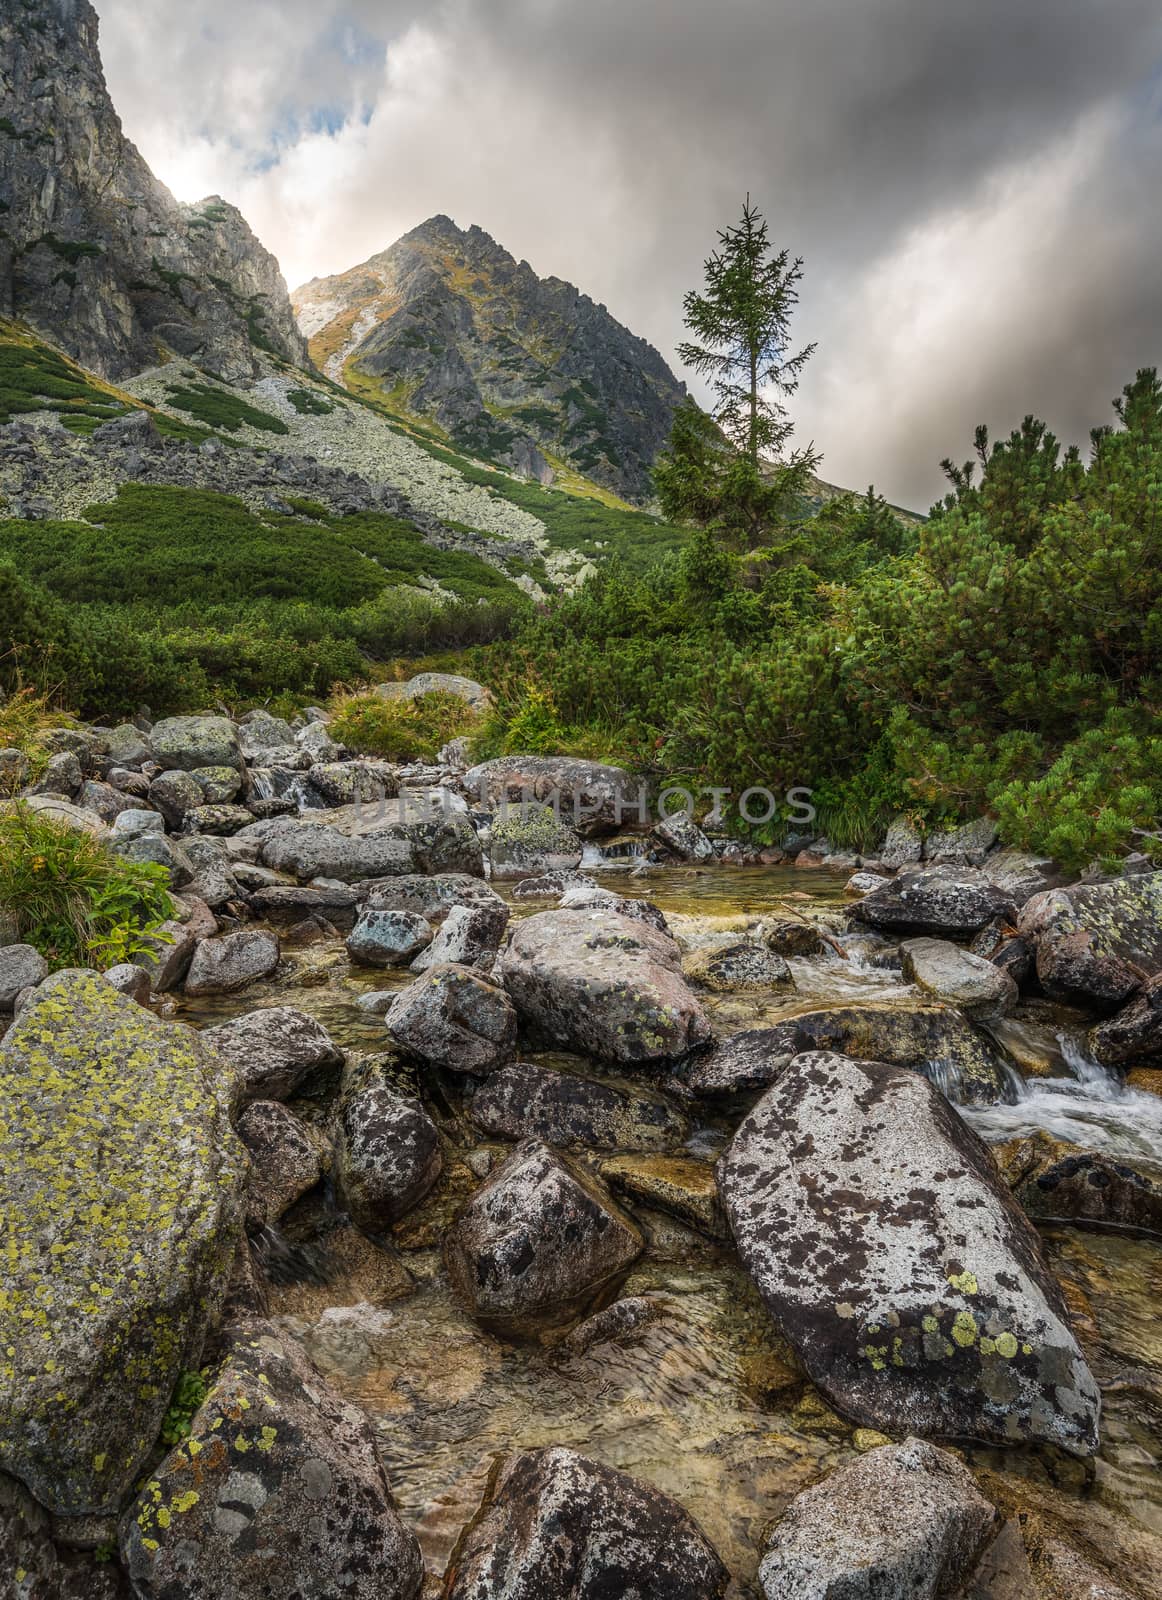 Mountain Landscape with a Creek by Kayco